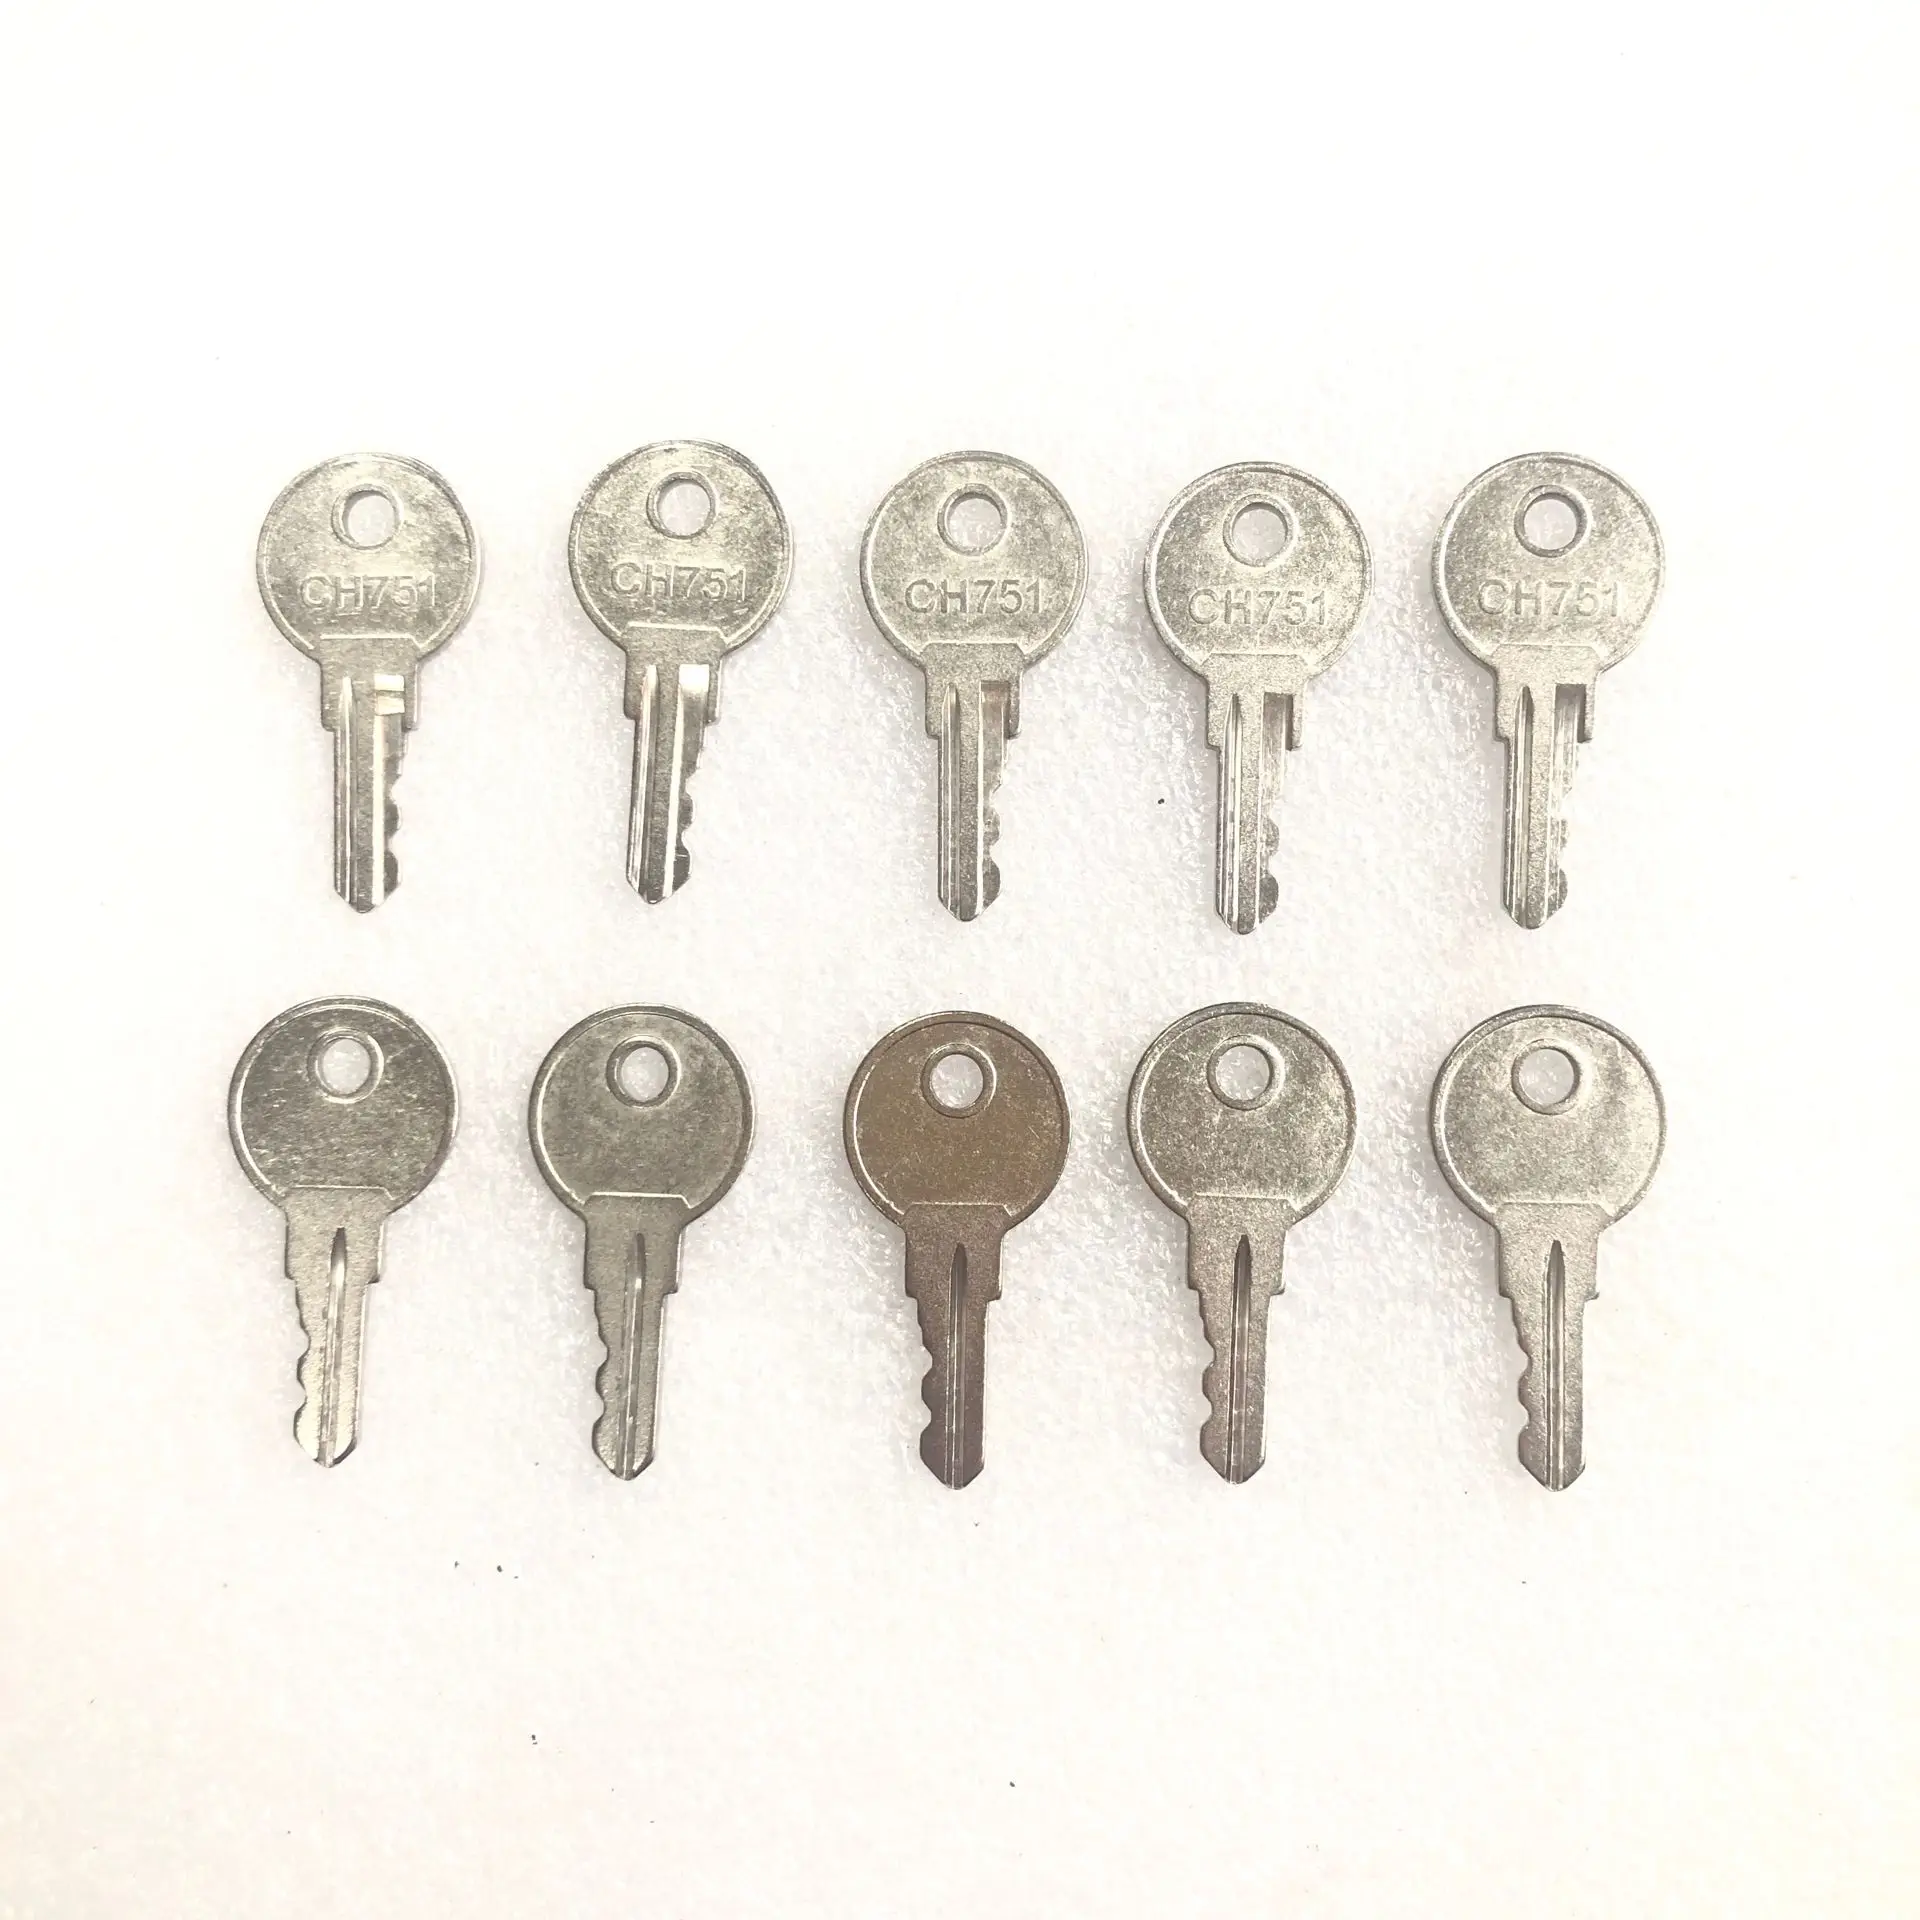 

10PCS CH751 Key for RV Campers Cabinets Push Lock